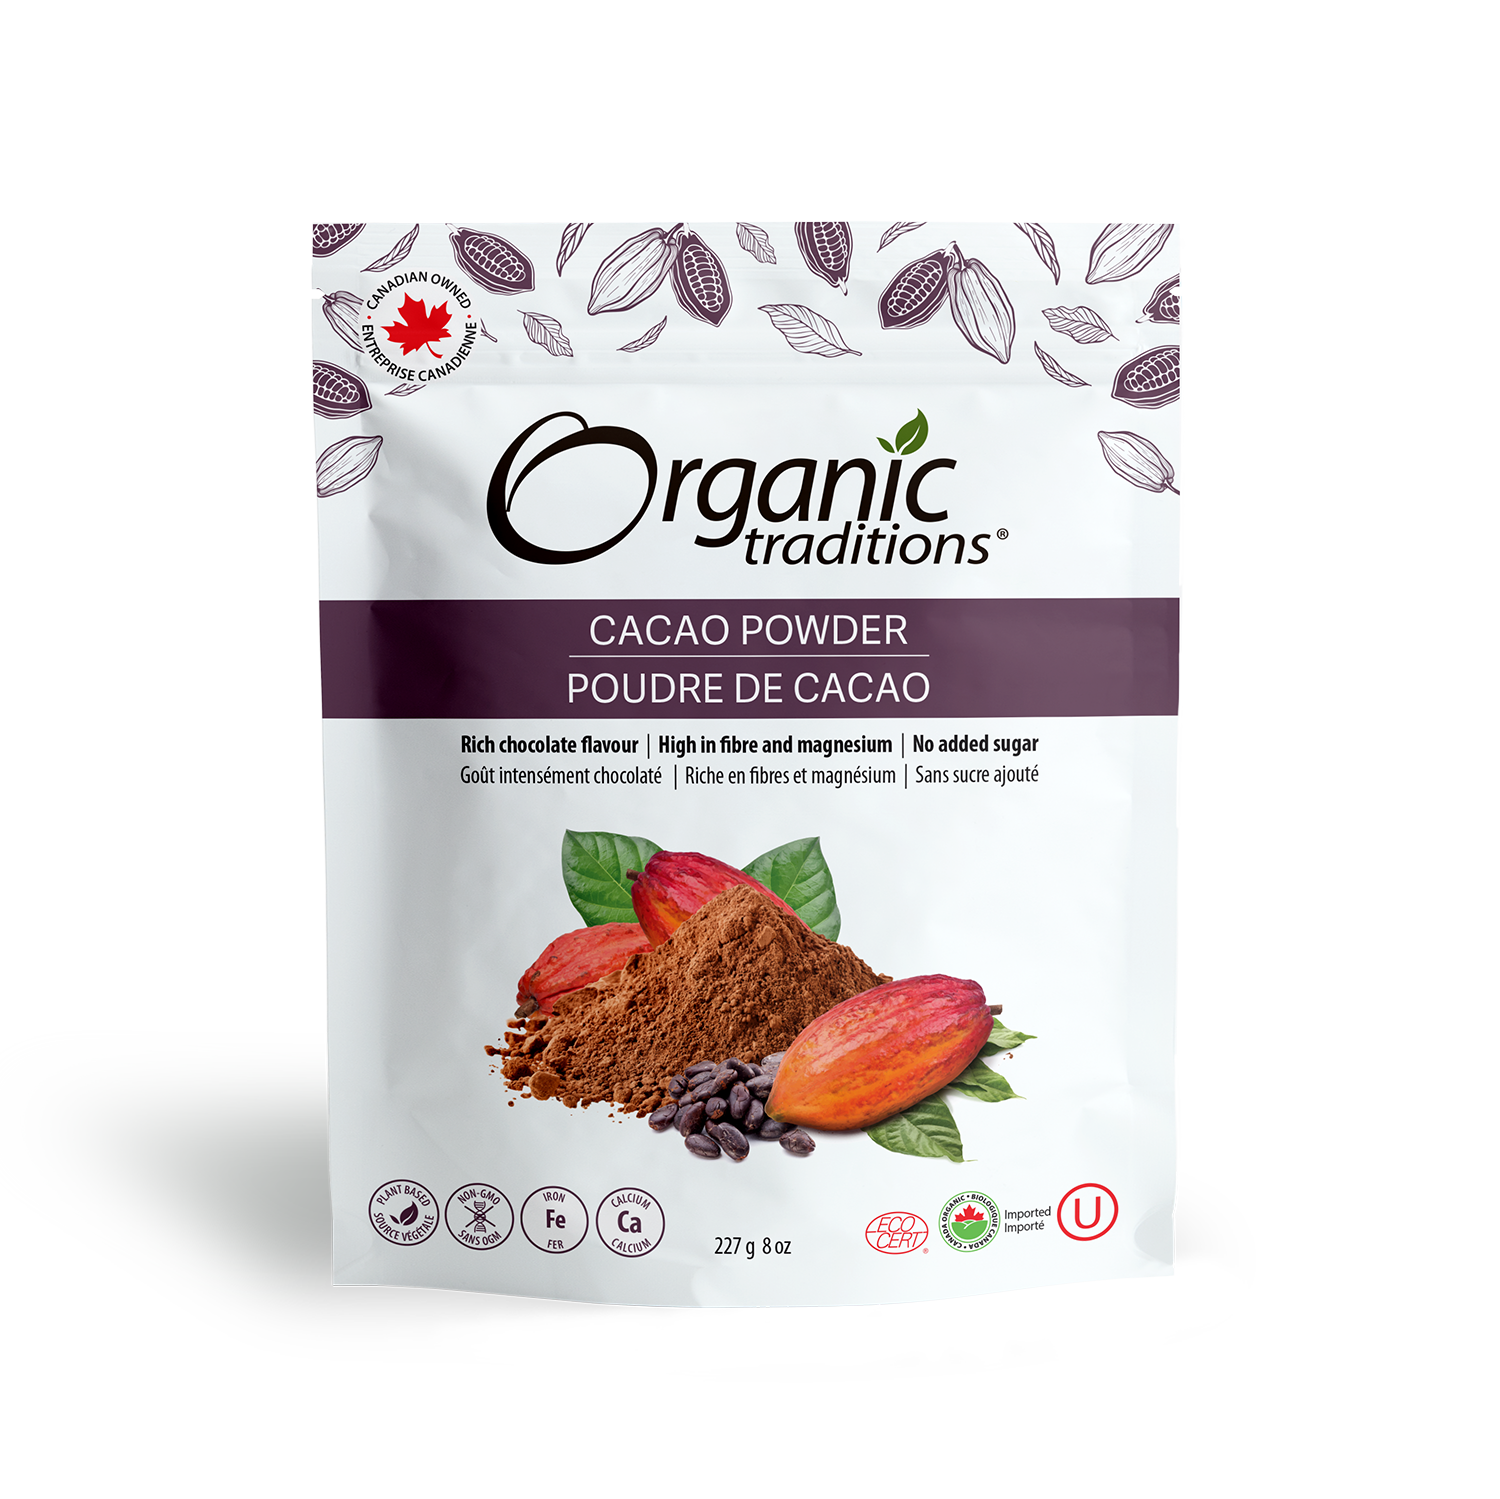 organic traditions cacao powder front of bag image